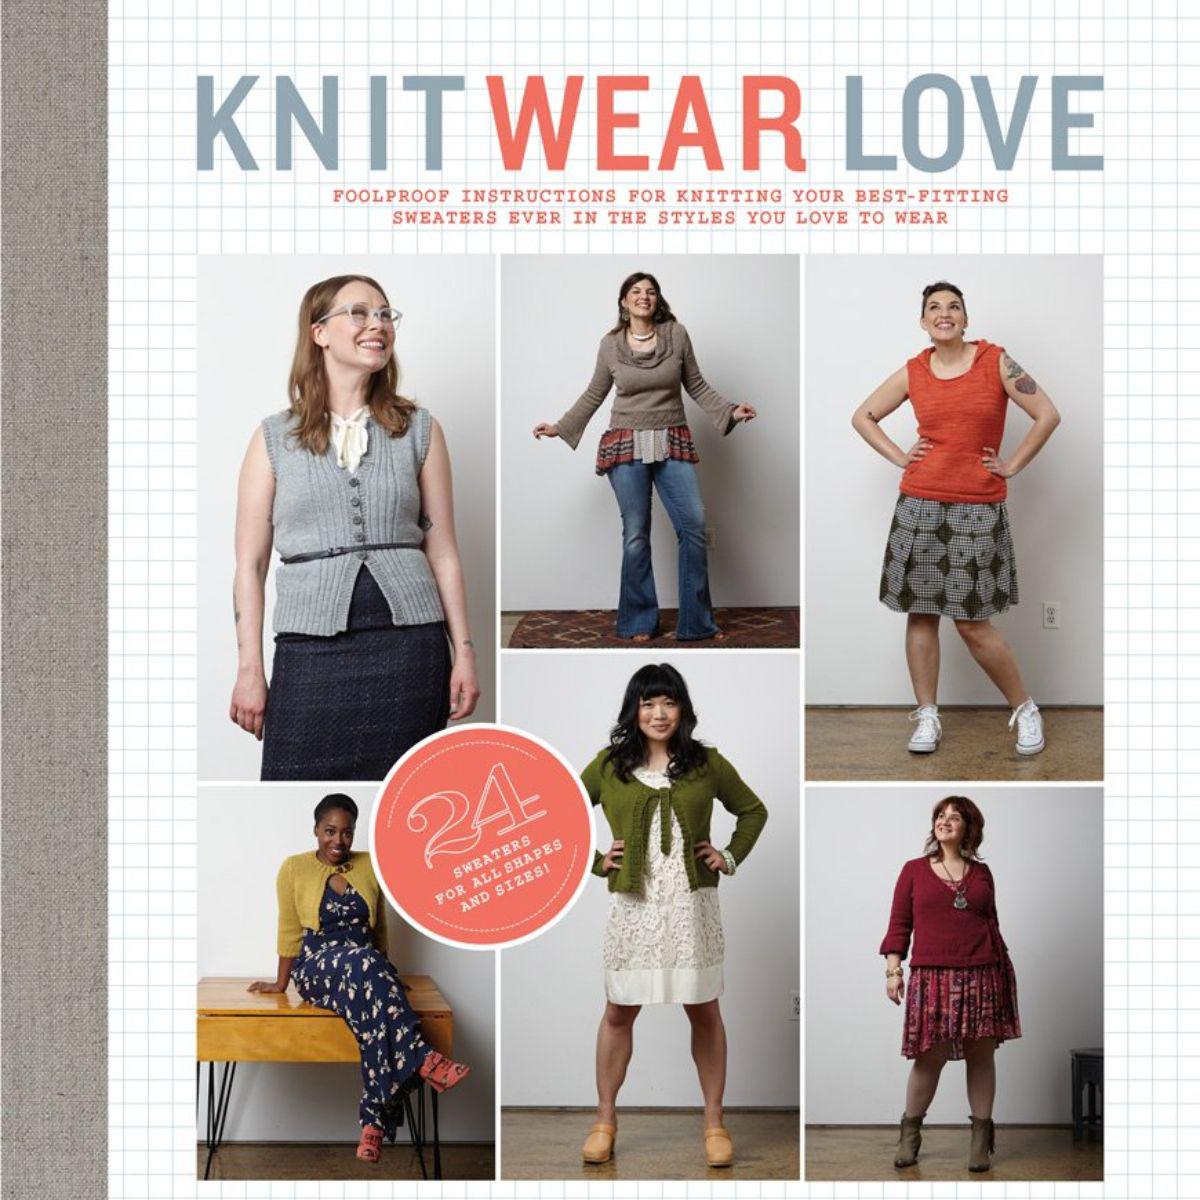 Abrams-Knit Wear Love-book-gather here online